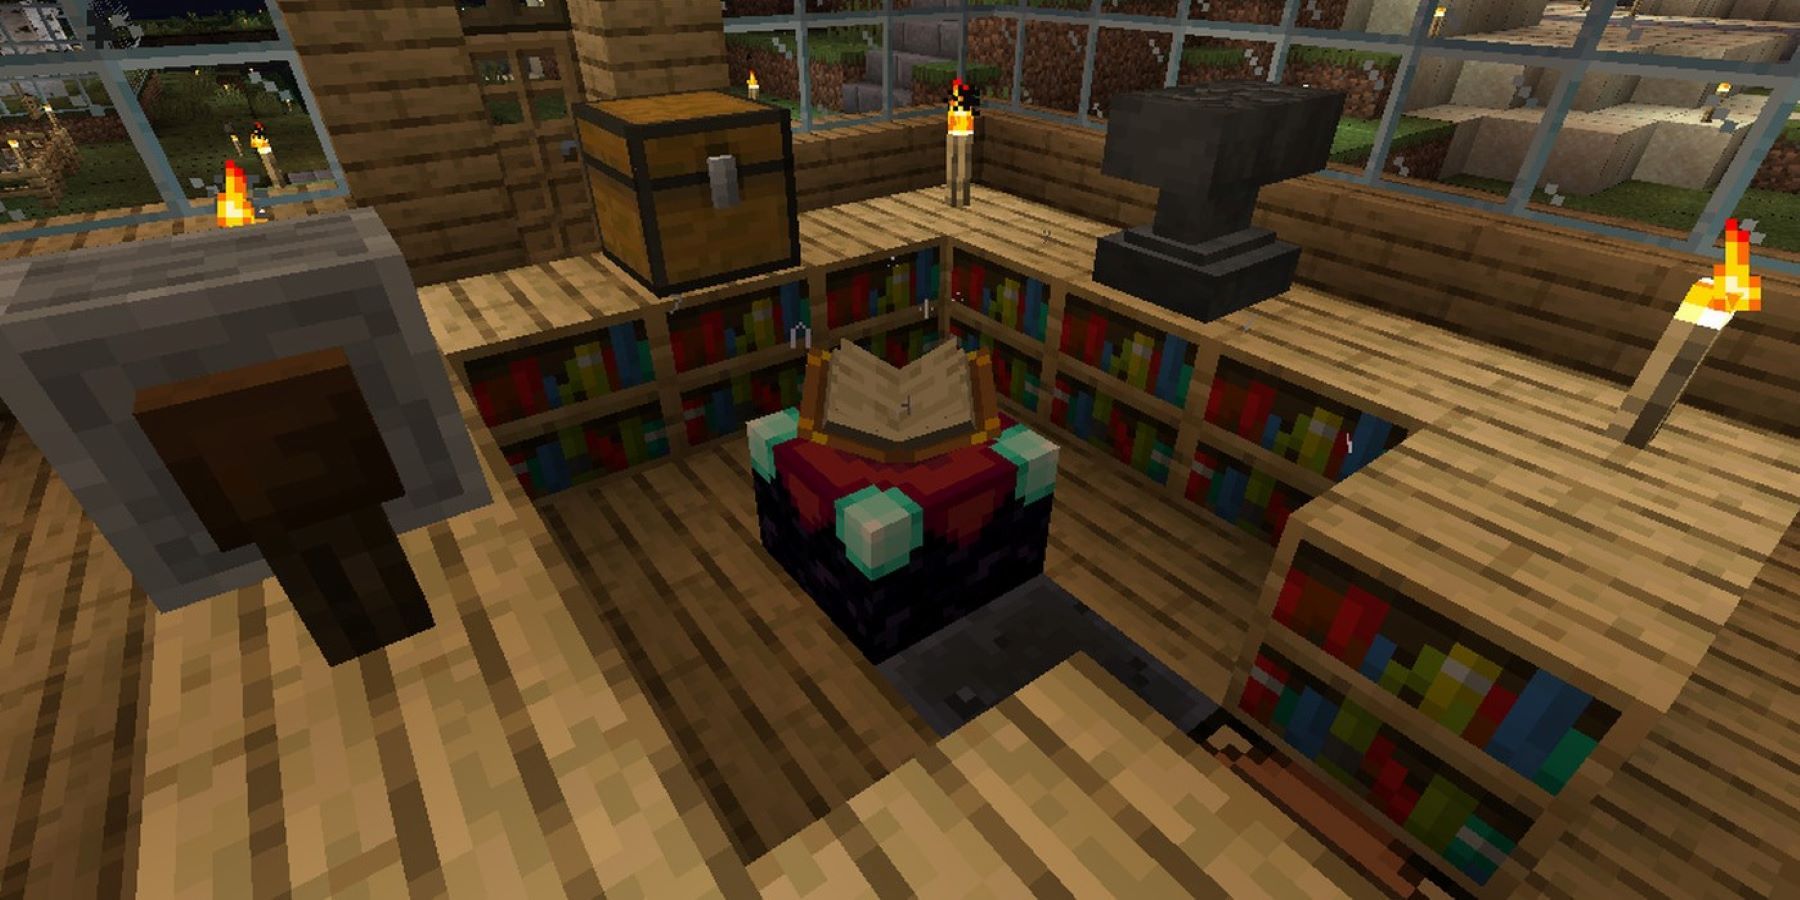 An enchanting table in Minecraft surrounded by bookshelves, an anvil, a grindstone, and a chest